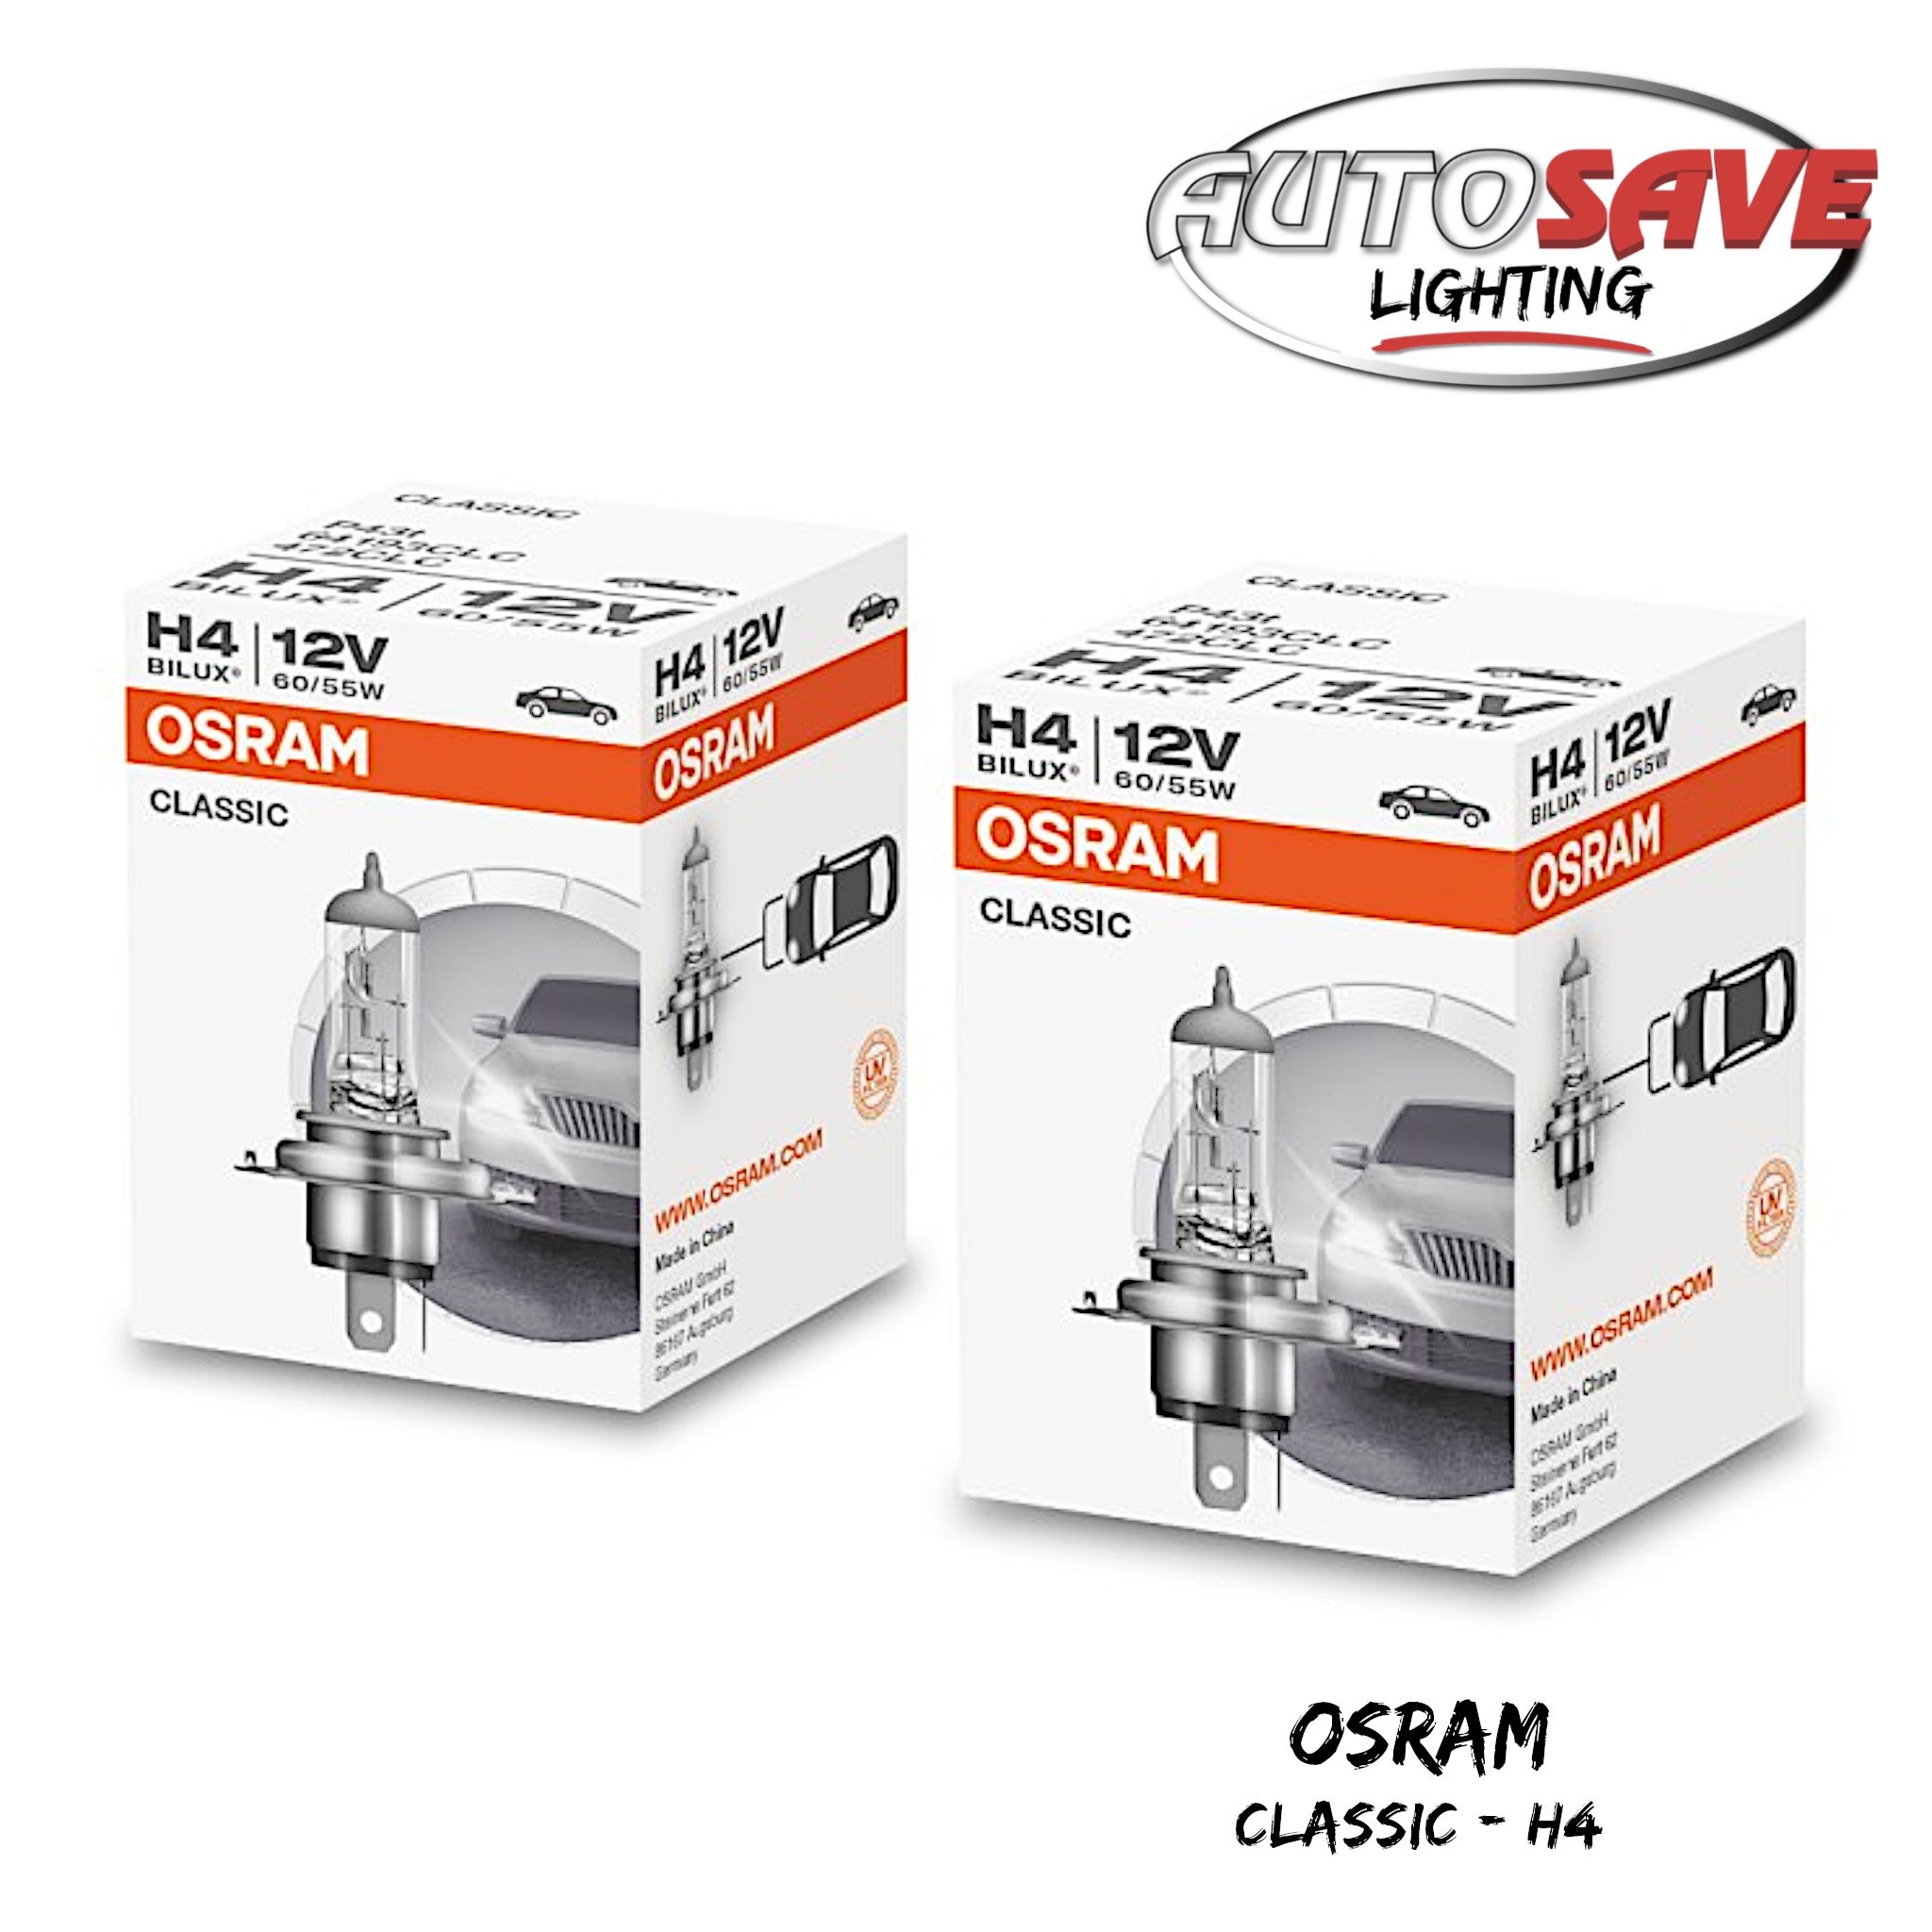 Osram H4 Classic Lamp 12 Volt 60/55W Bulbs 64193CLC TWIN PACK NEW Autosave Components